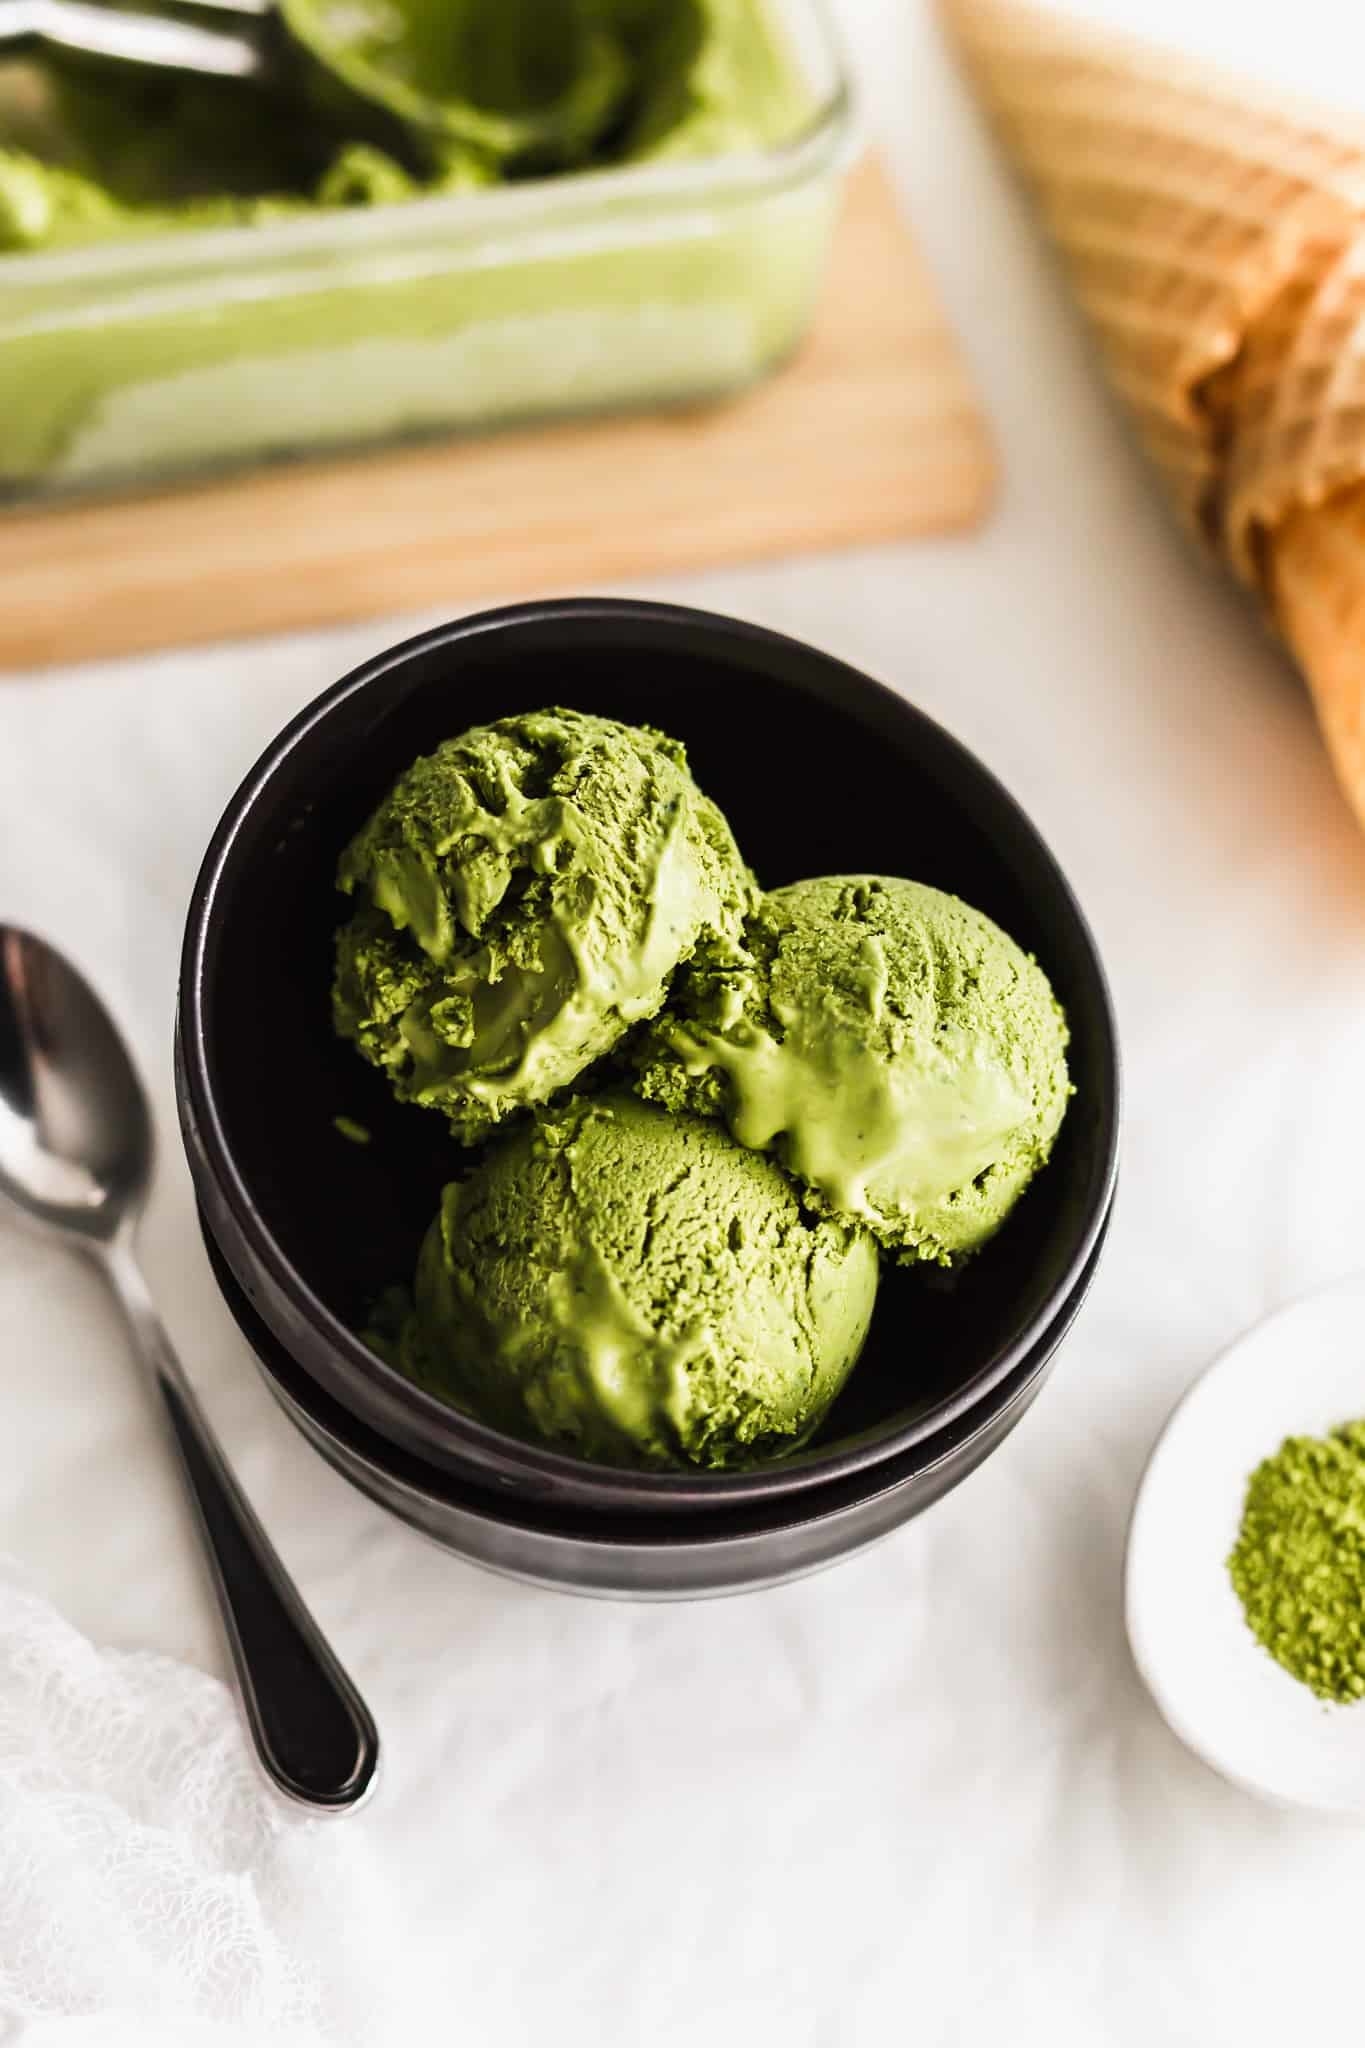 Three scoops of green ice cream in a black bowl next to a spoon.